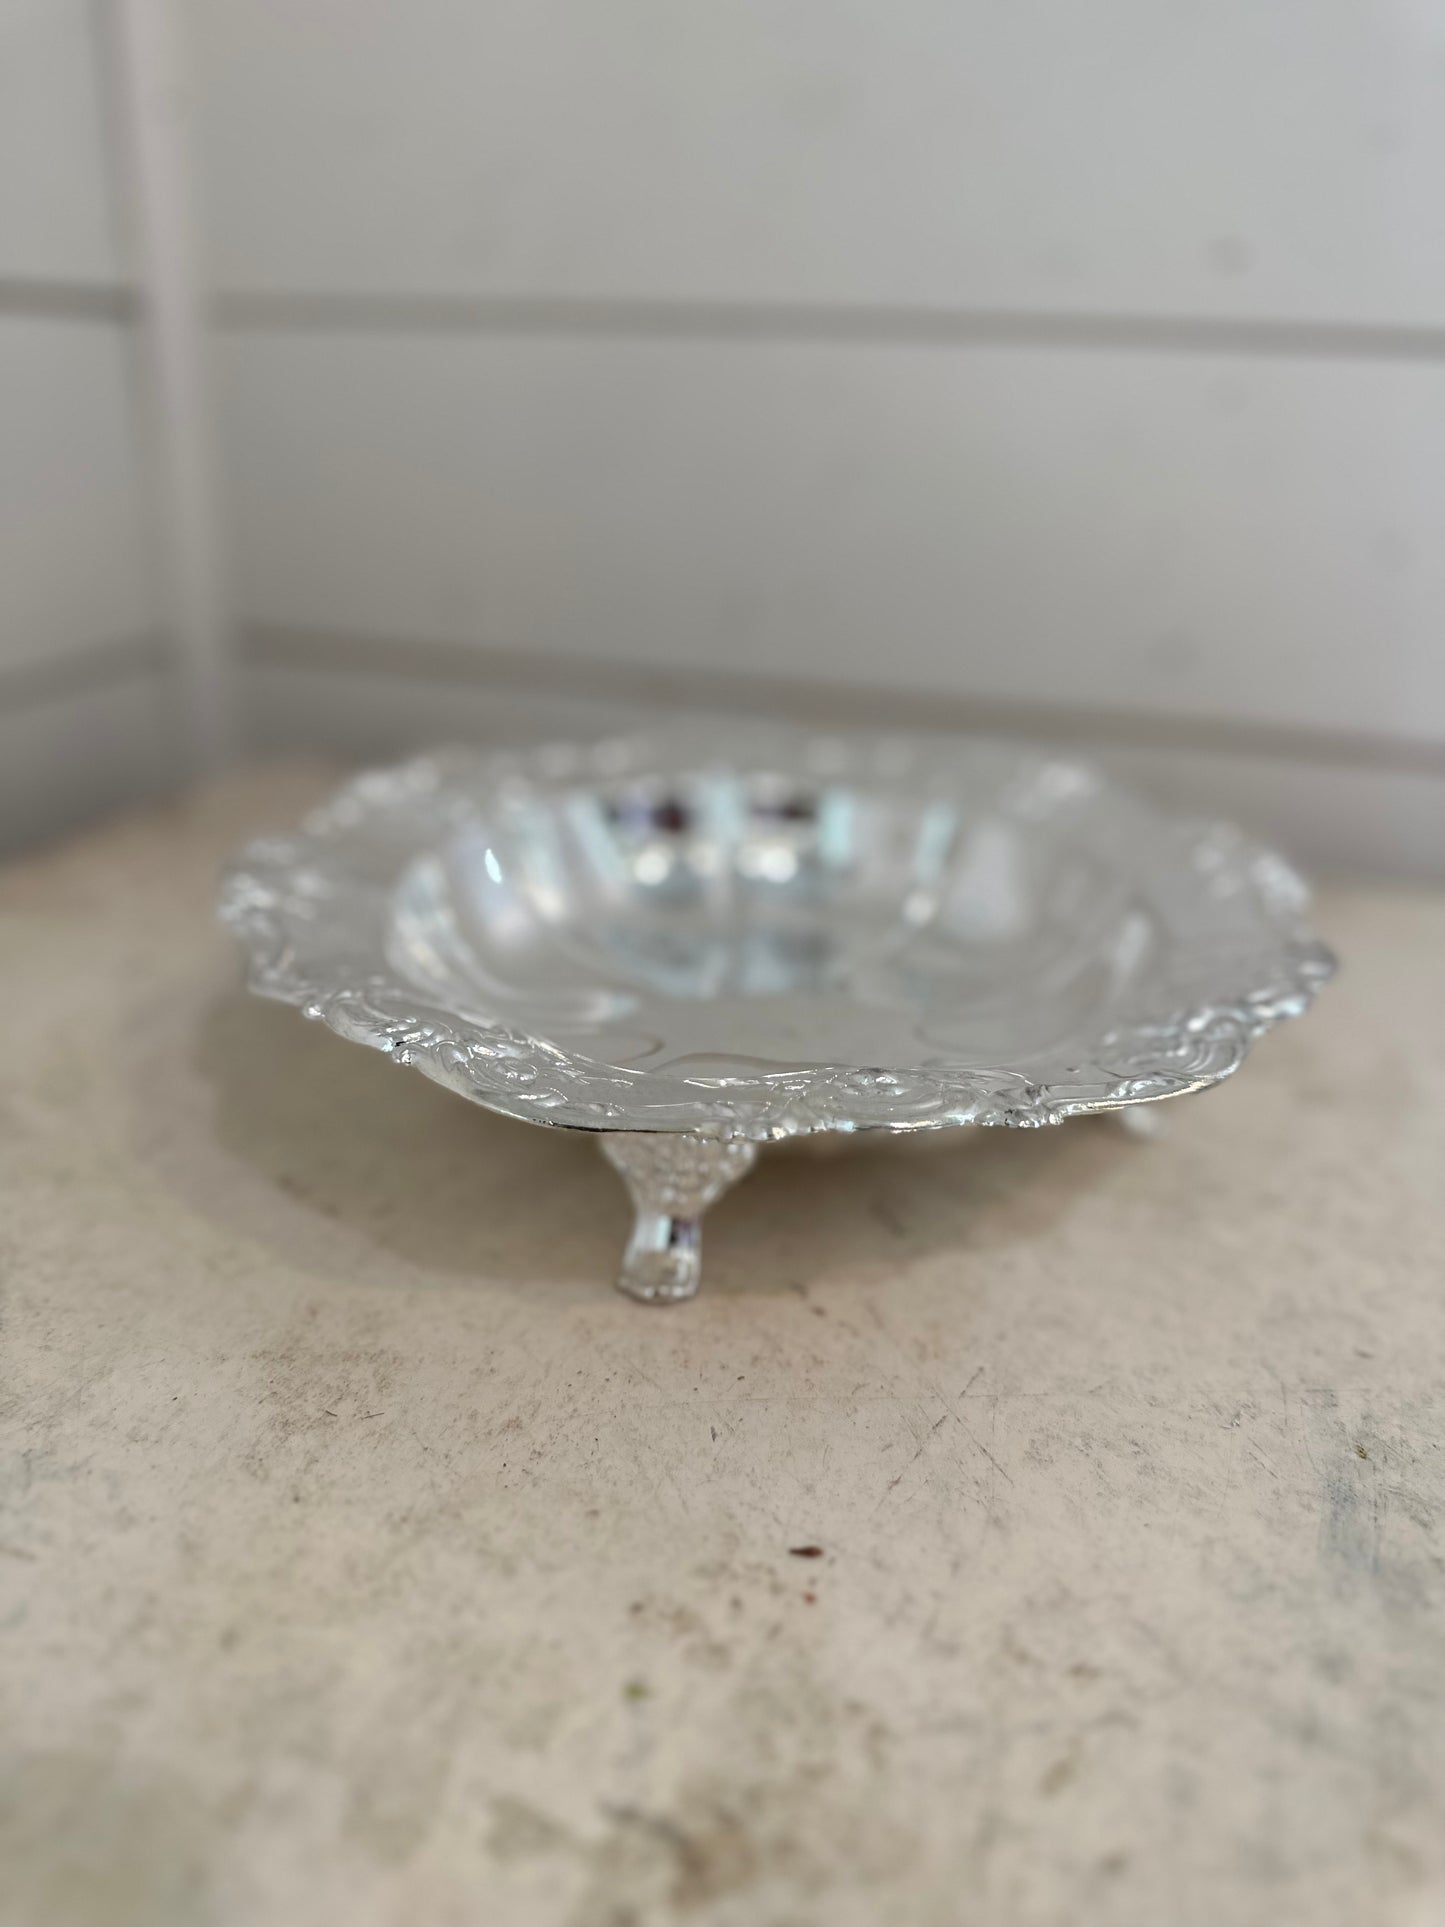 Vintage Silver Plated Candy Dish with feet - new in box